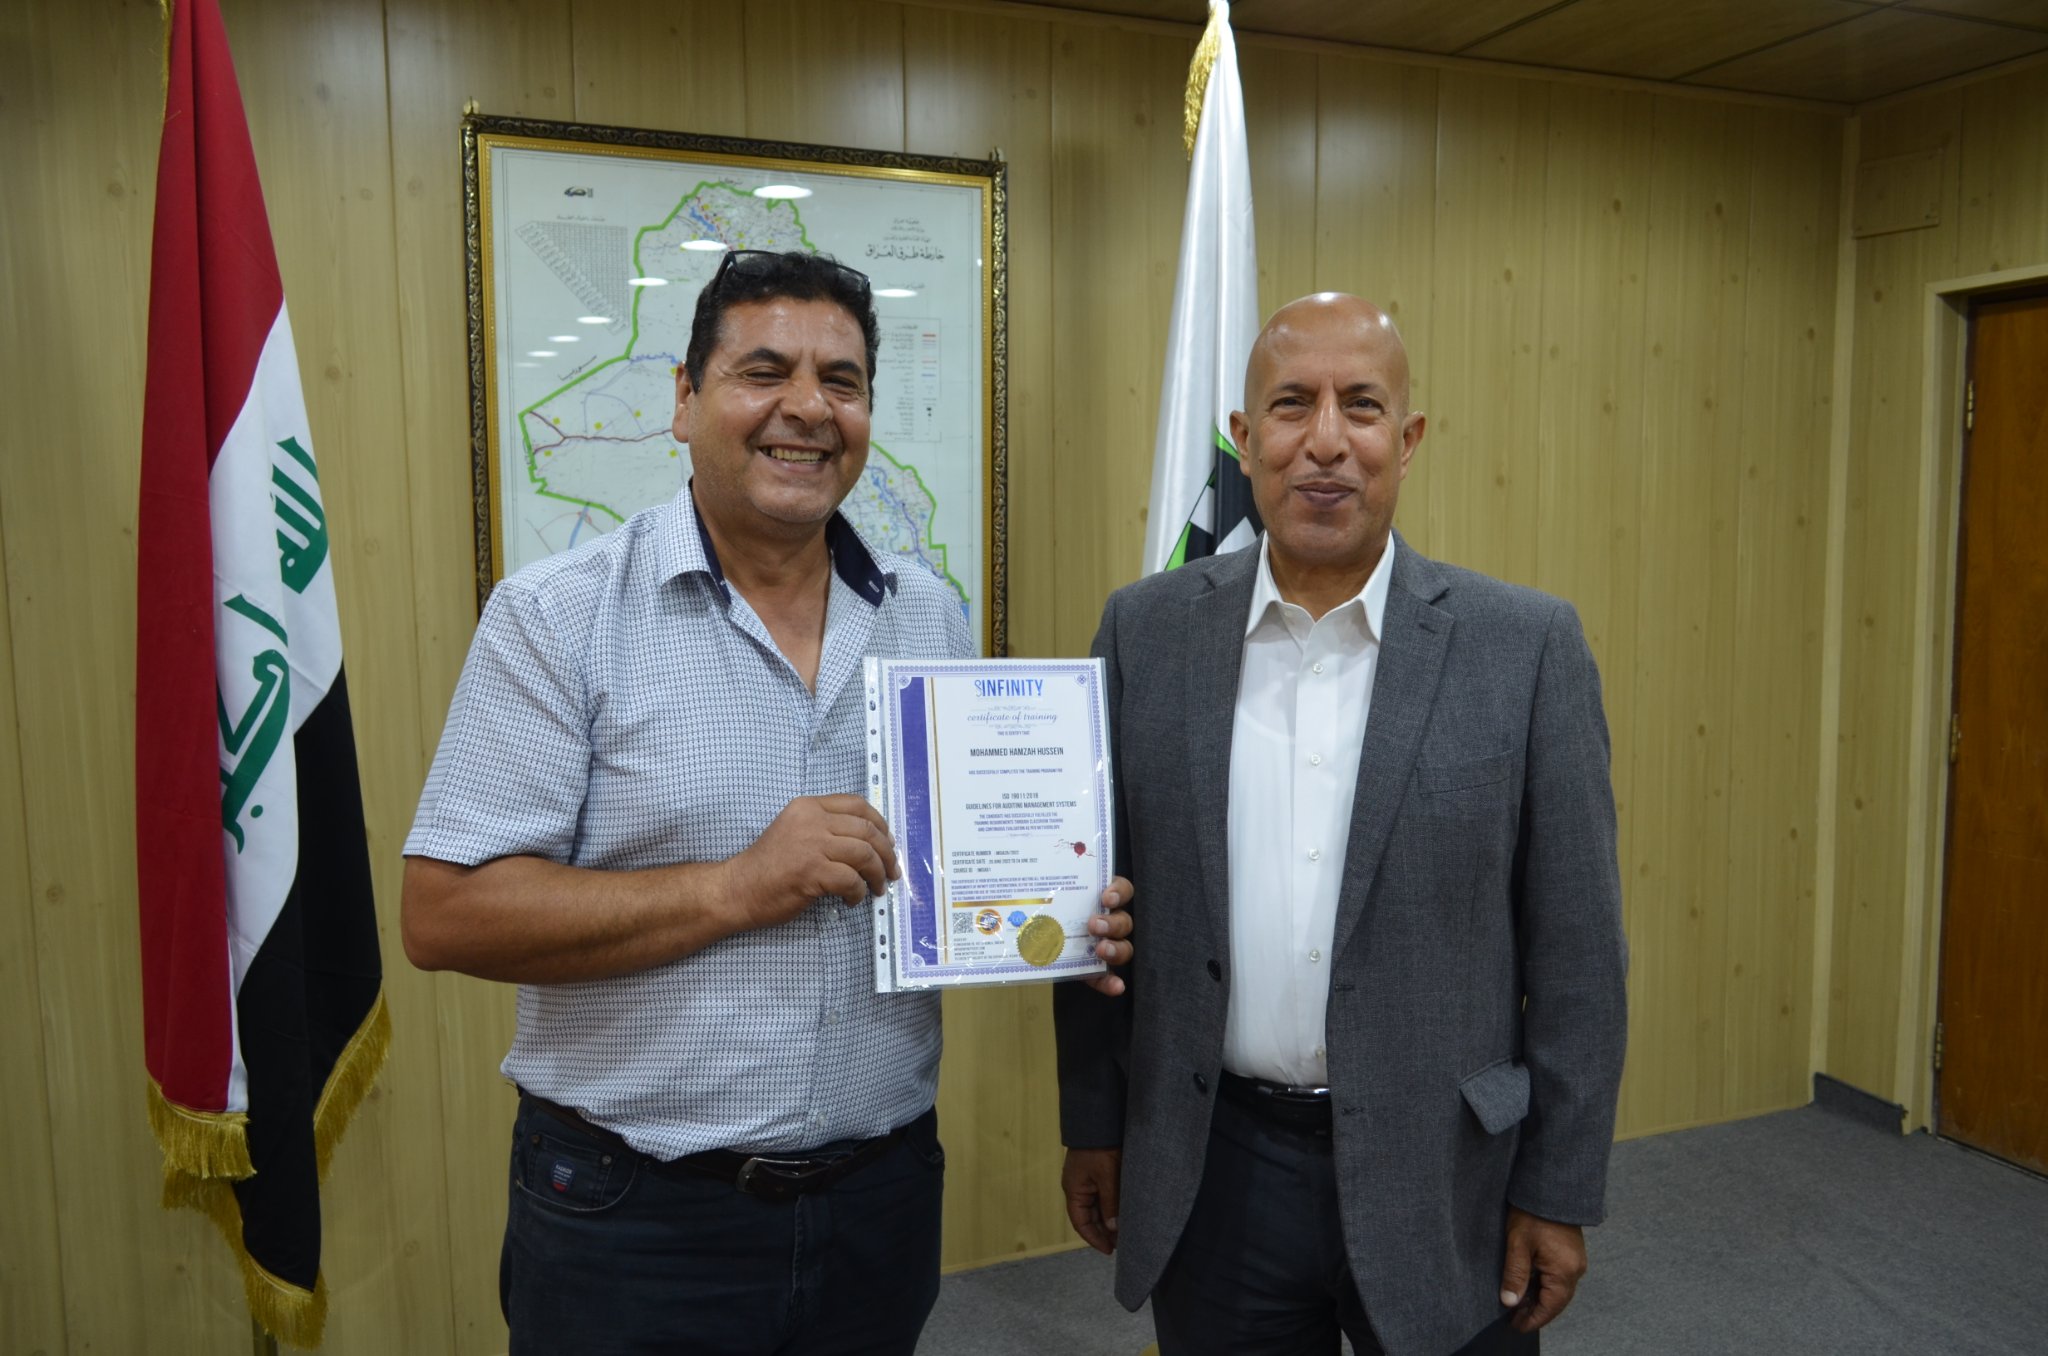 DISTRIBUTION OF CERTIFICATES OF QUALITY AUDITORS FOR THE INTEGRATED MANAGEMENT SYSTEM (IMS)